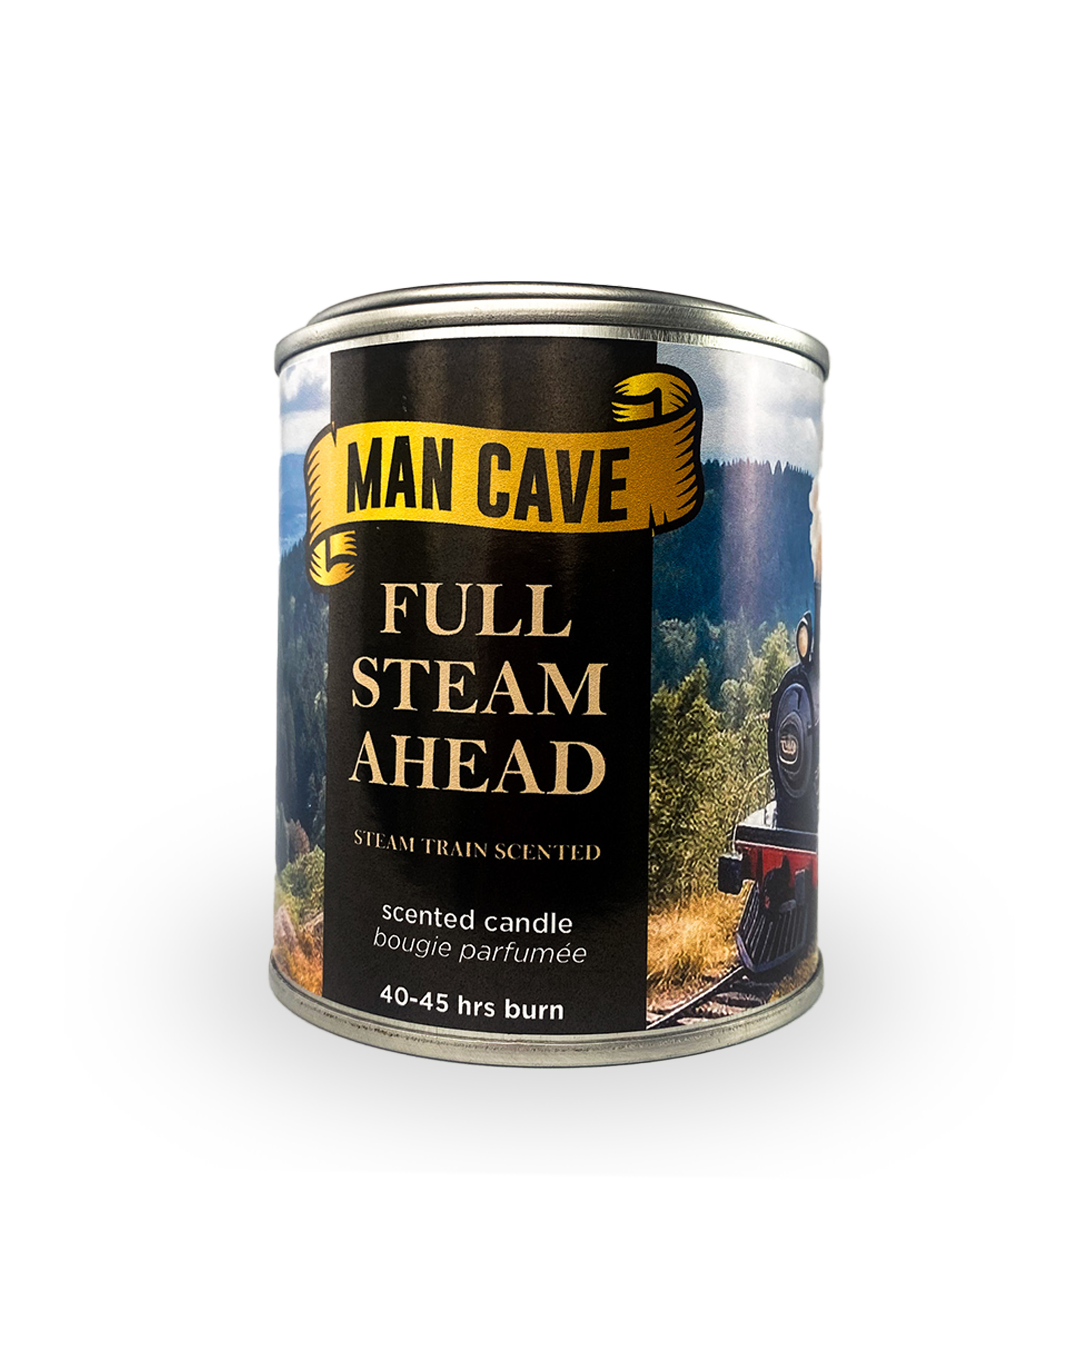 Full Steam Ahead - Steam Train Scented Candle